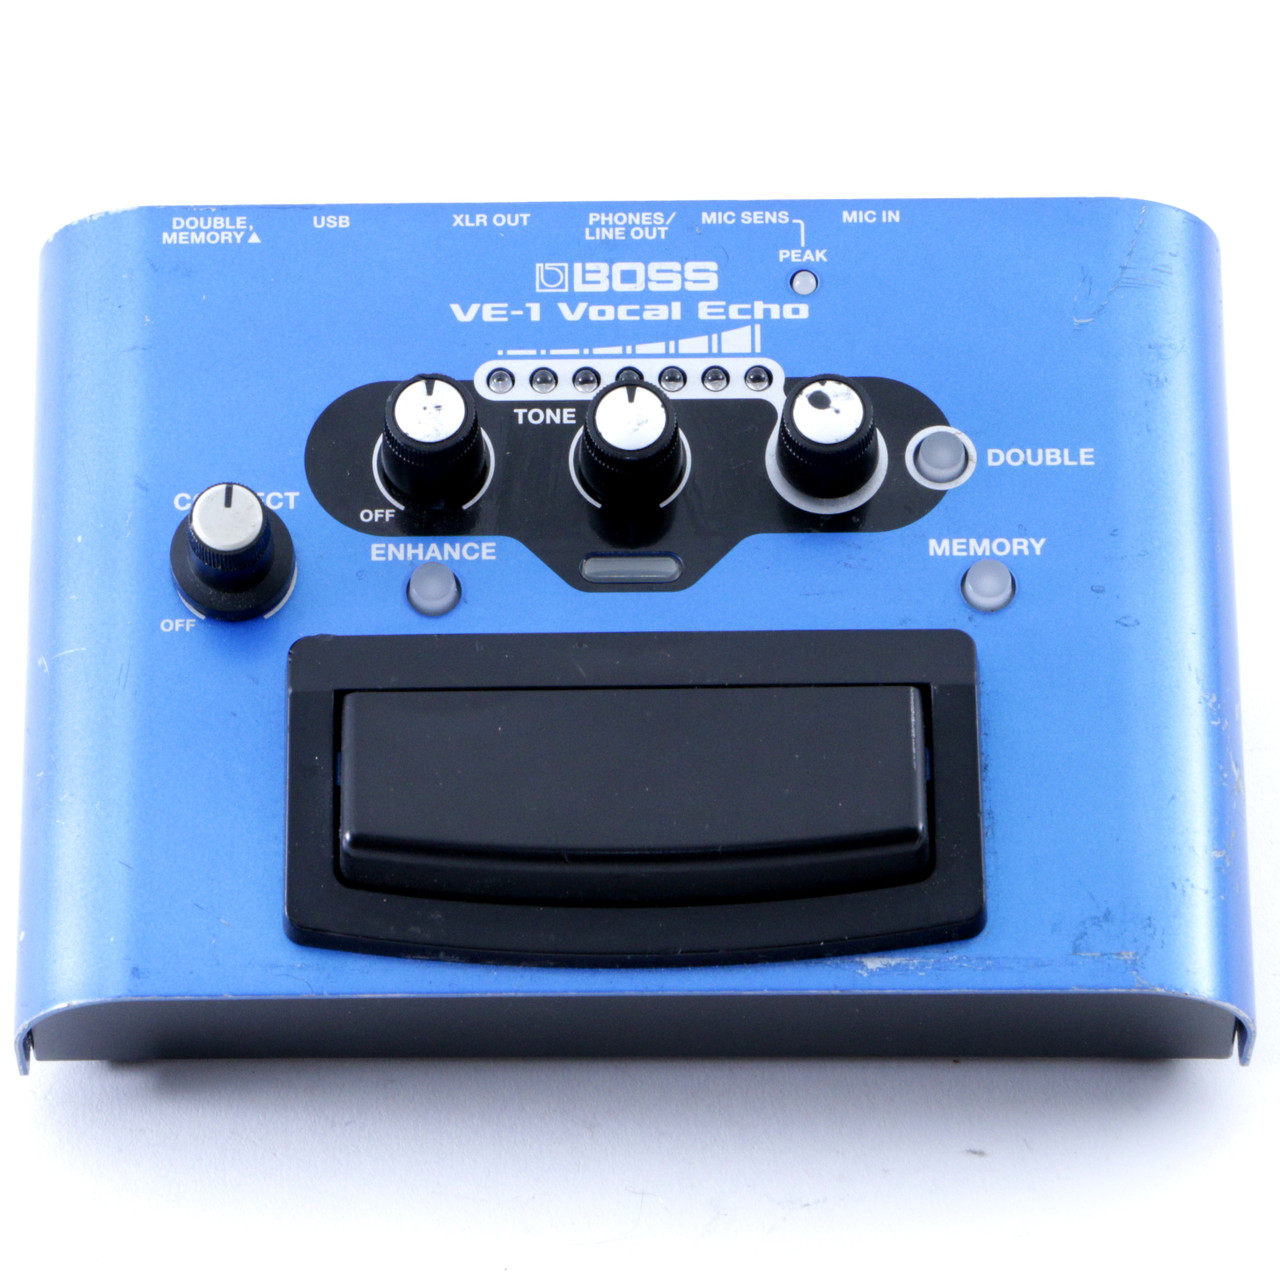 Boss Ve 1 Vocal Echo Vocal Effects Pedal P